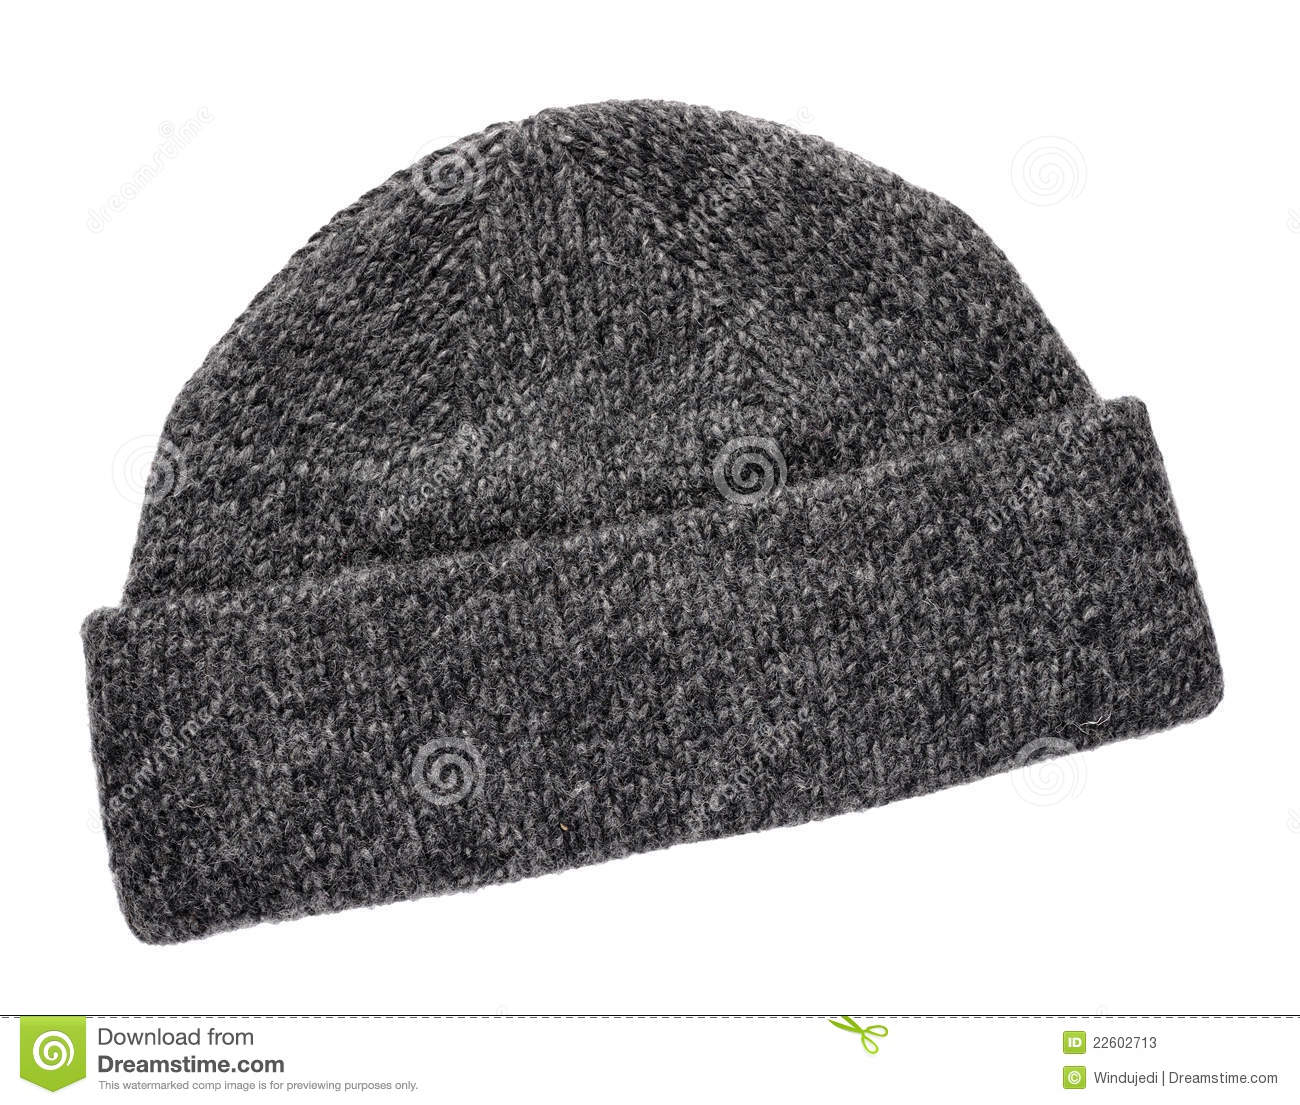 Wool Knitted Winter Hat Stock Photos   Image  22602713